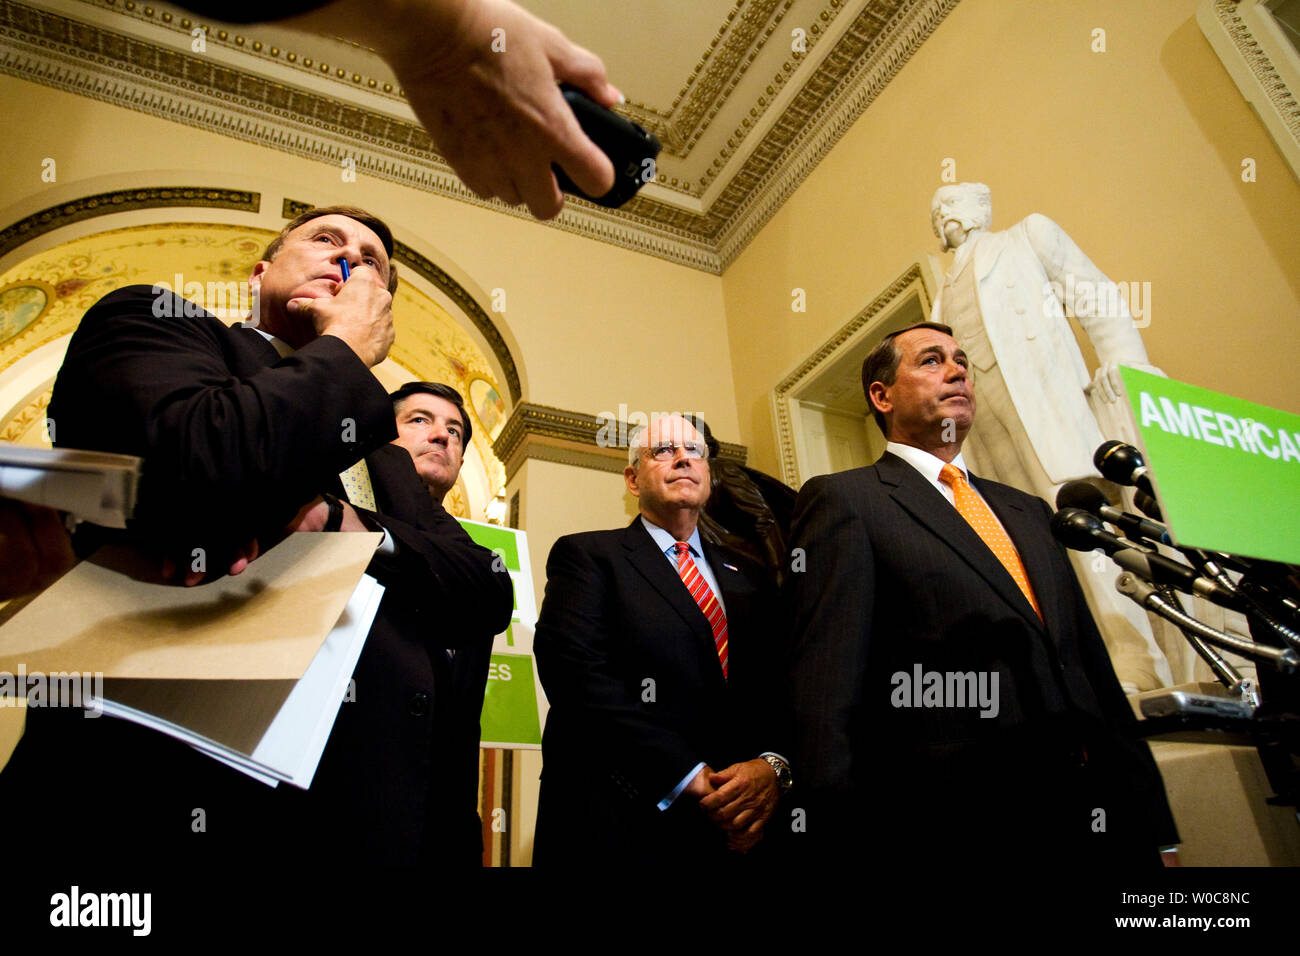 House Minority Leader John Boehner (R-OH) speaks during a news conference on Capitol Hill in Washington on August 20, 2008. The House Republicans are calling on Speaker Nancy Pelosi, D-CA, to reconvene the chamber and vote on the American Energy Act, a Republican bill designed to address America's dependence on foreign oil. This is the third week of Republican protest against the House recessing without dealing with high gas prices. (UPI Photo/Patrick D. McDermott) Stock Photo